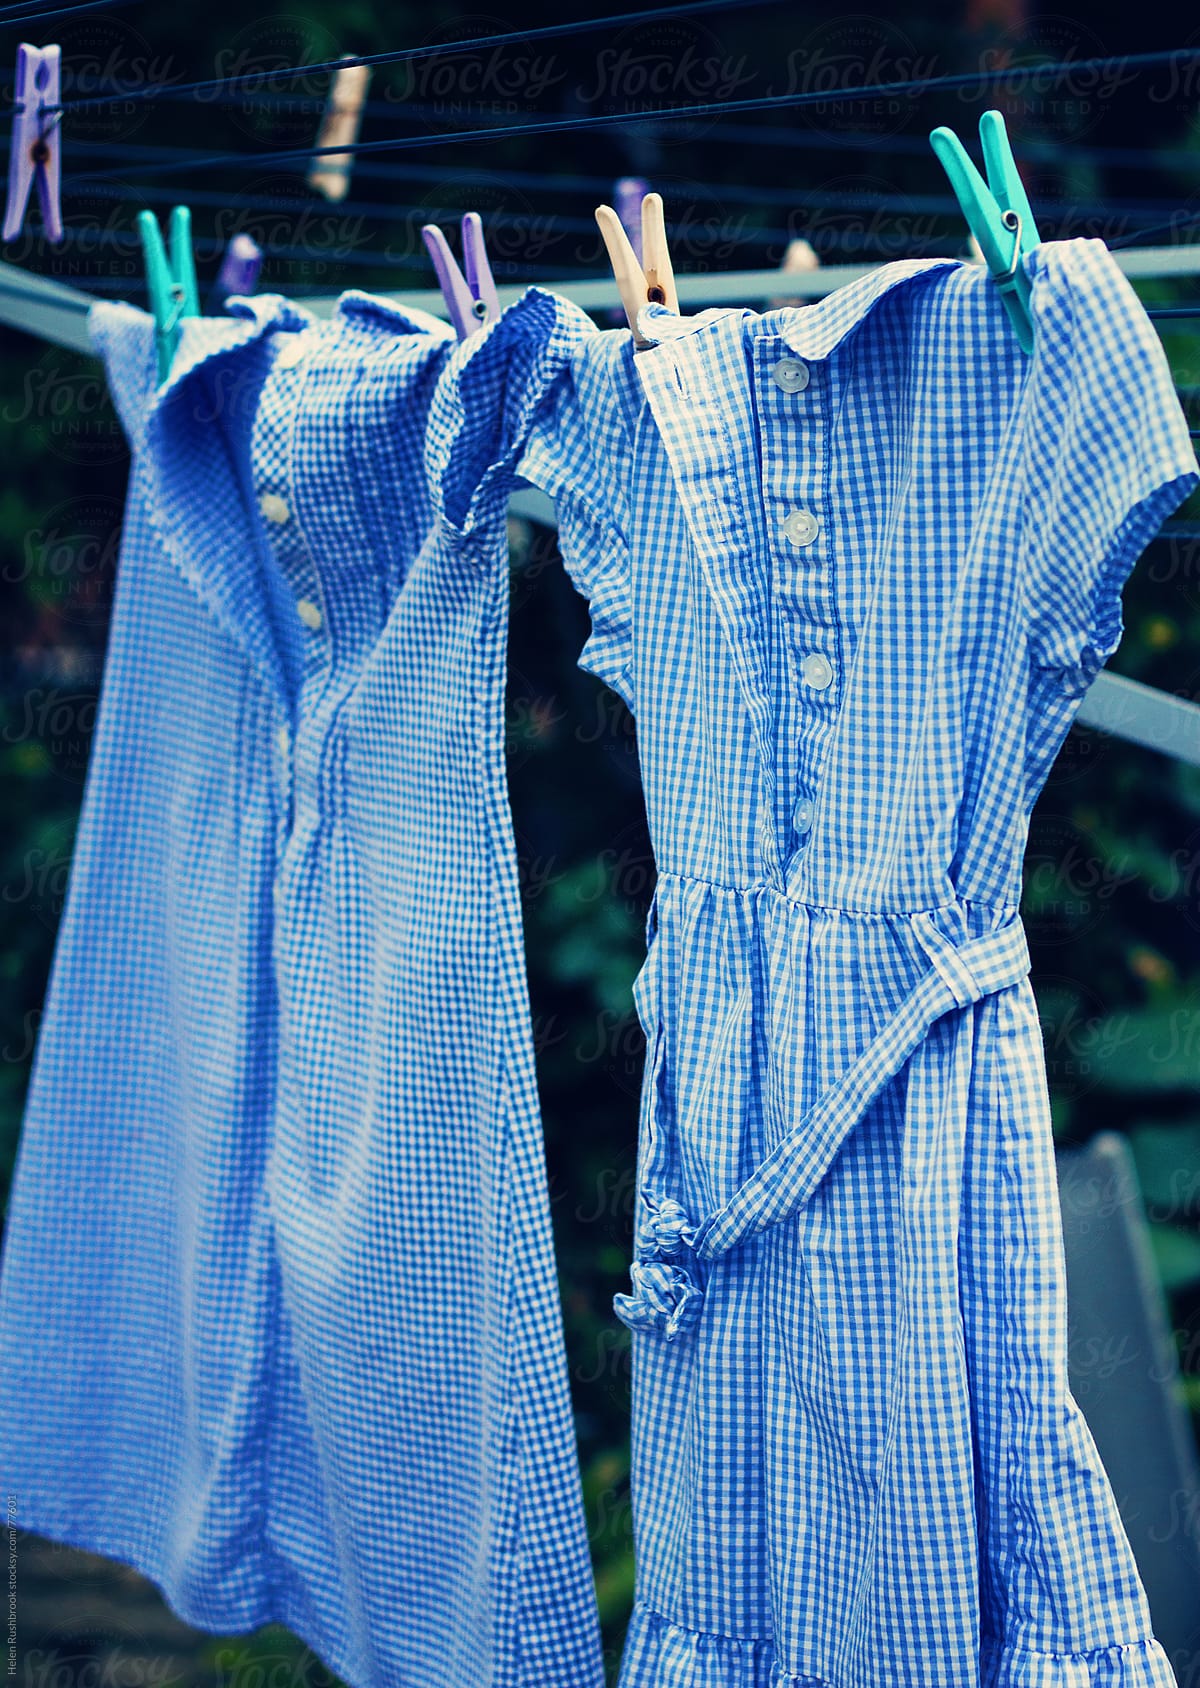 School dresses hanging on a washing line